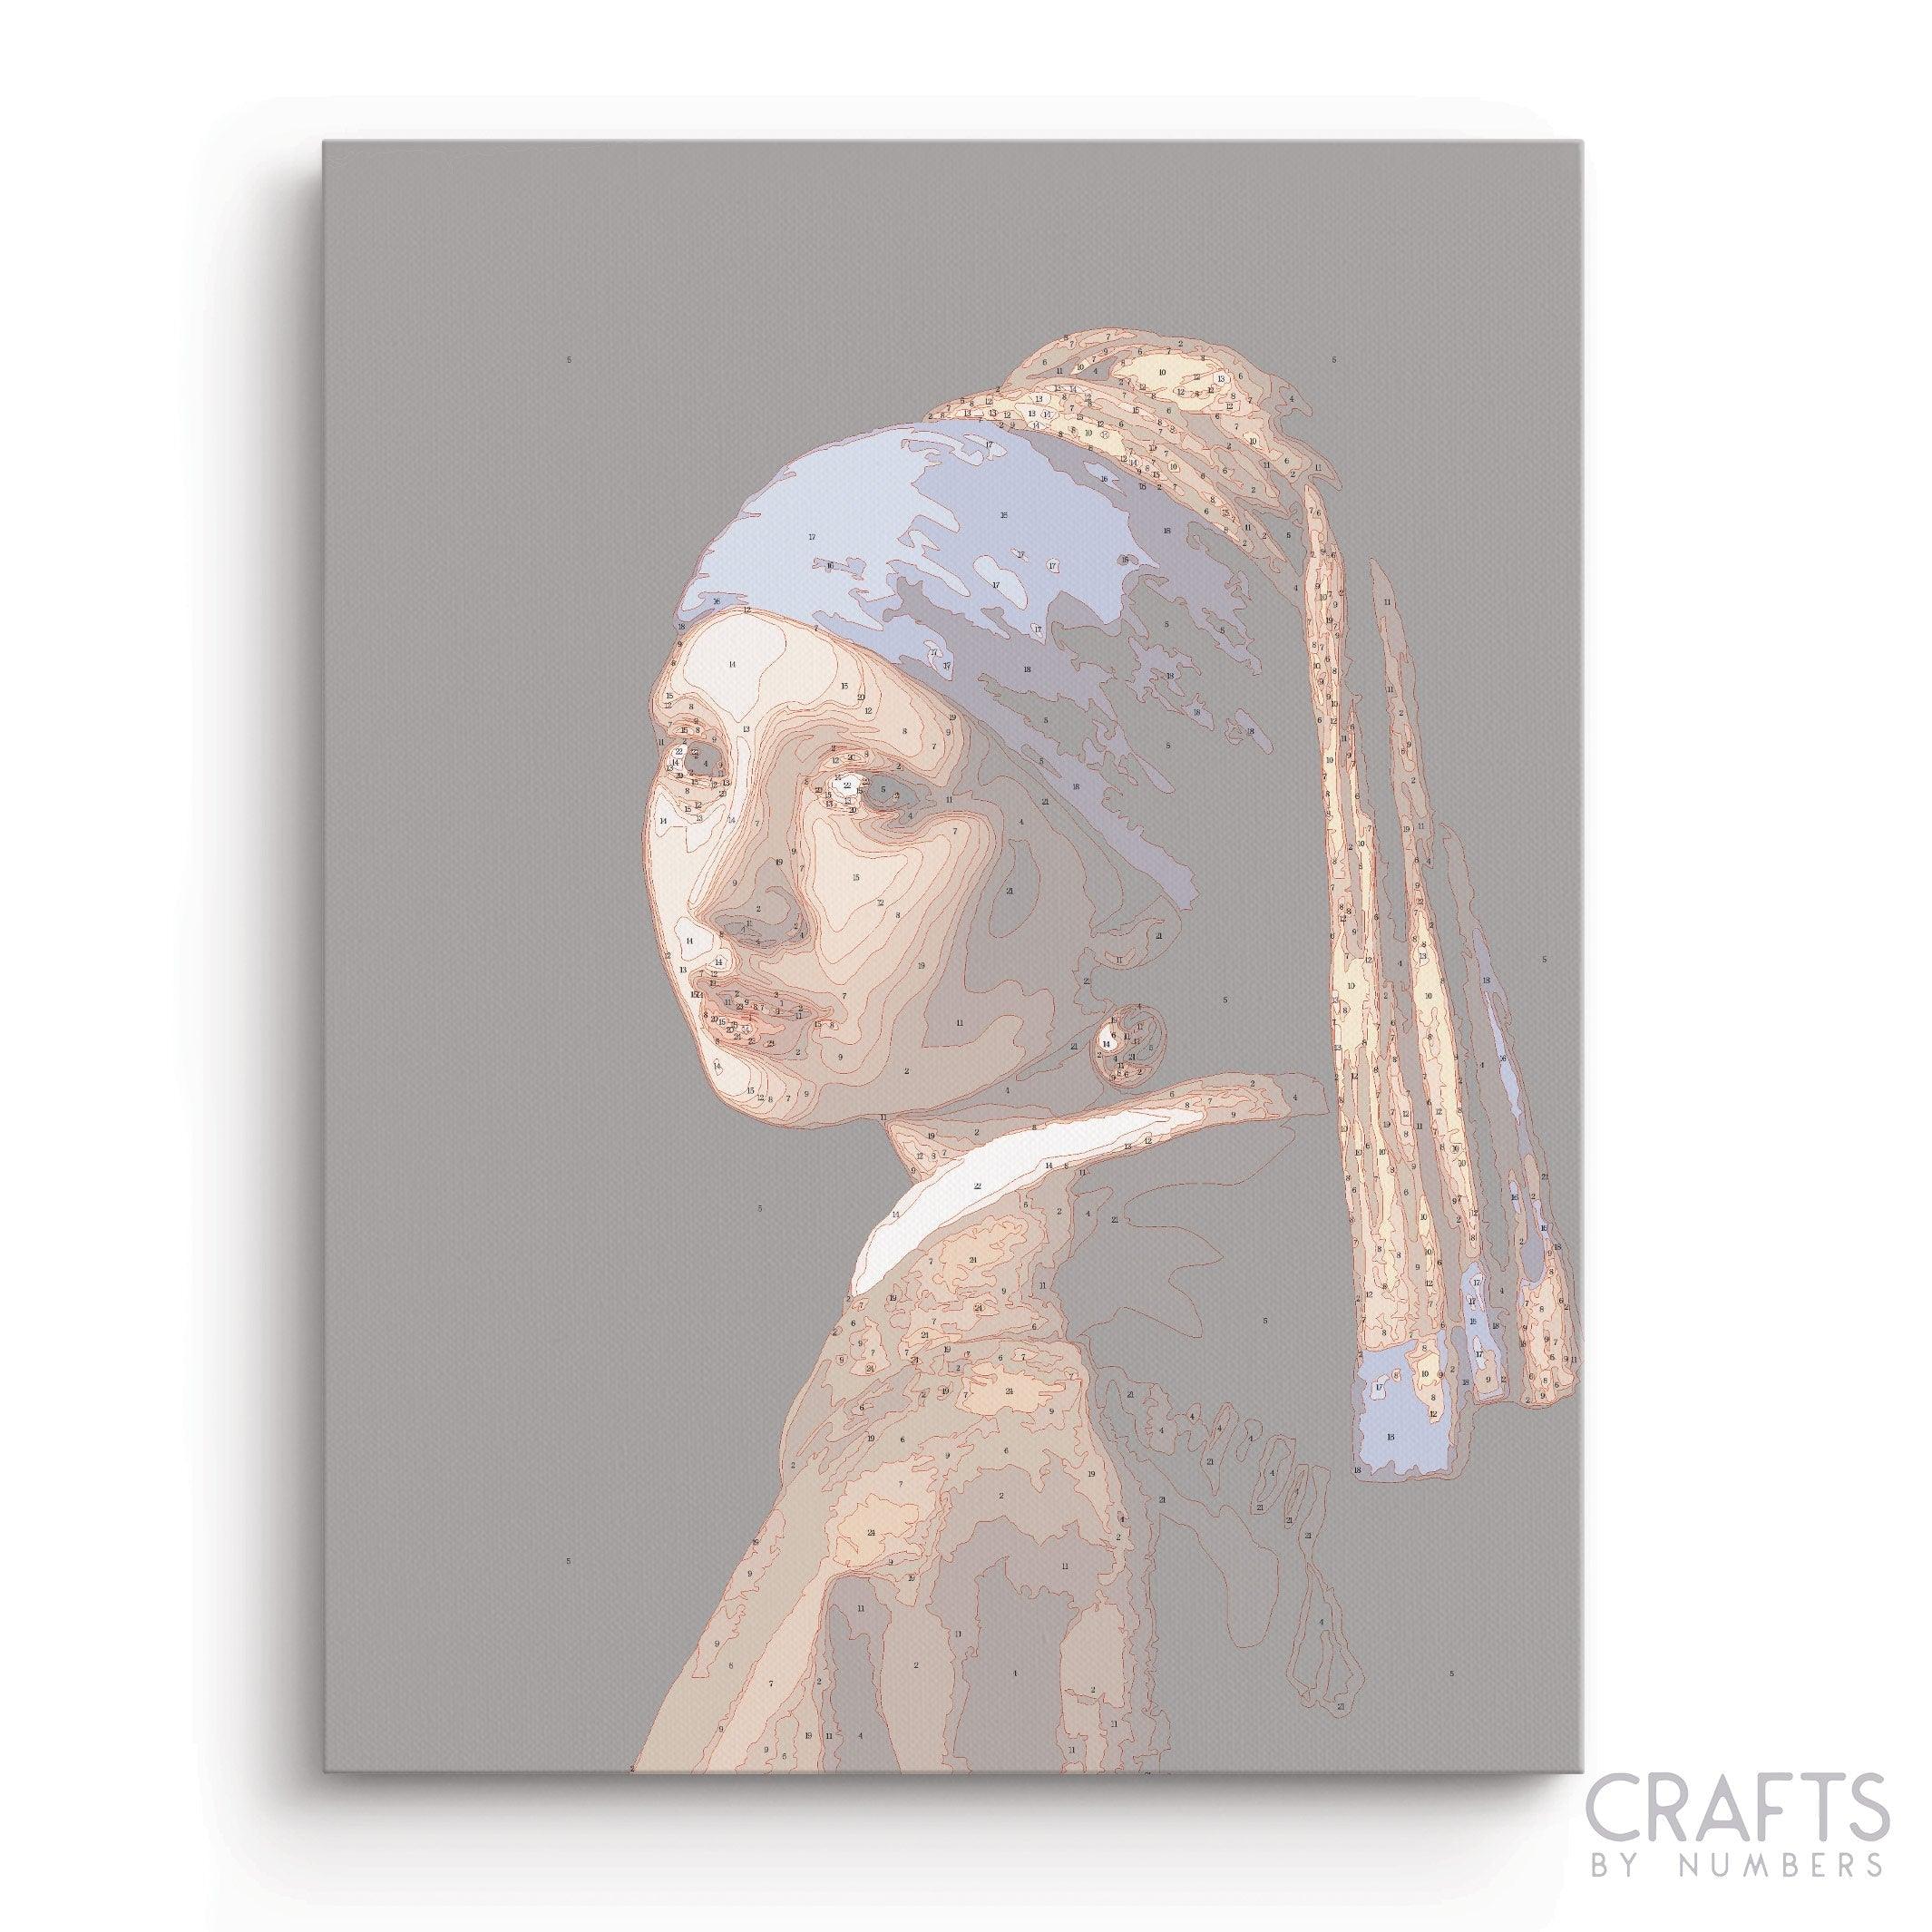 The Girl with a Pearl Earring | Vermeer | Painting Reproduction 1071 |  TOPofART